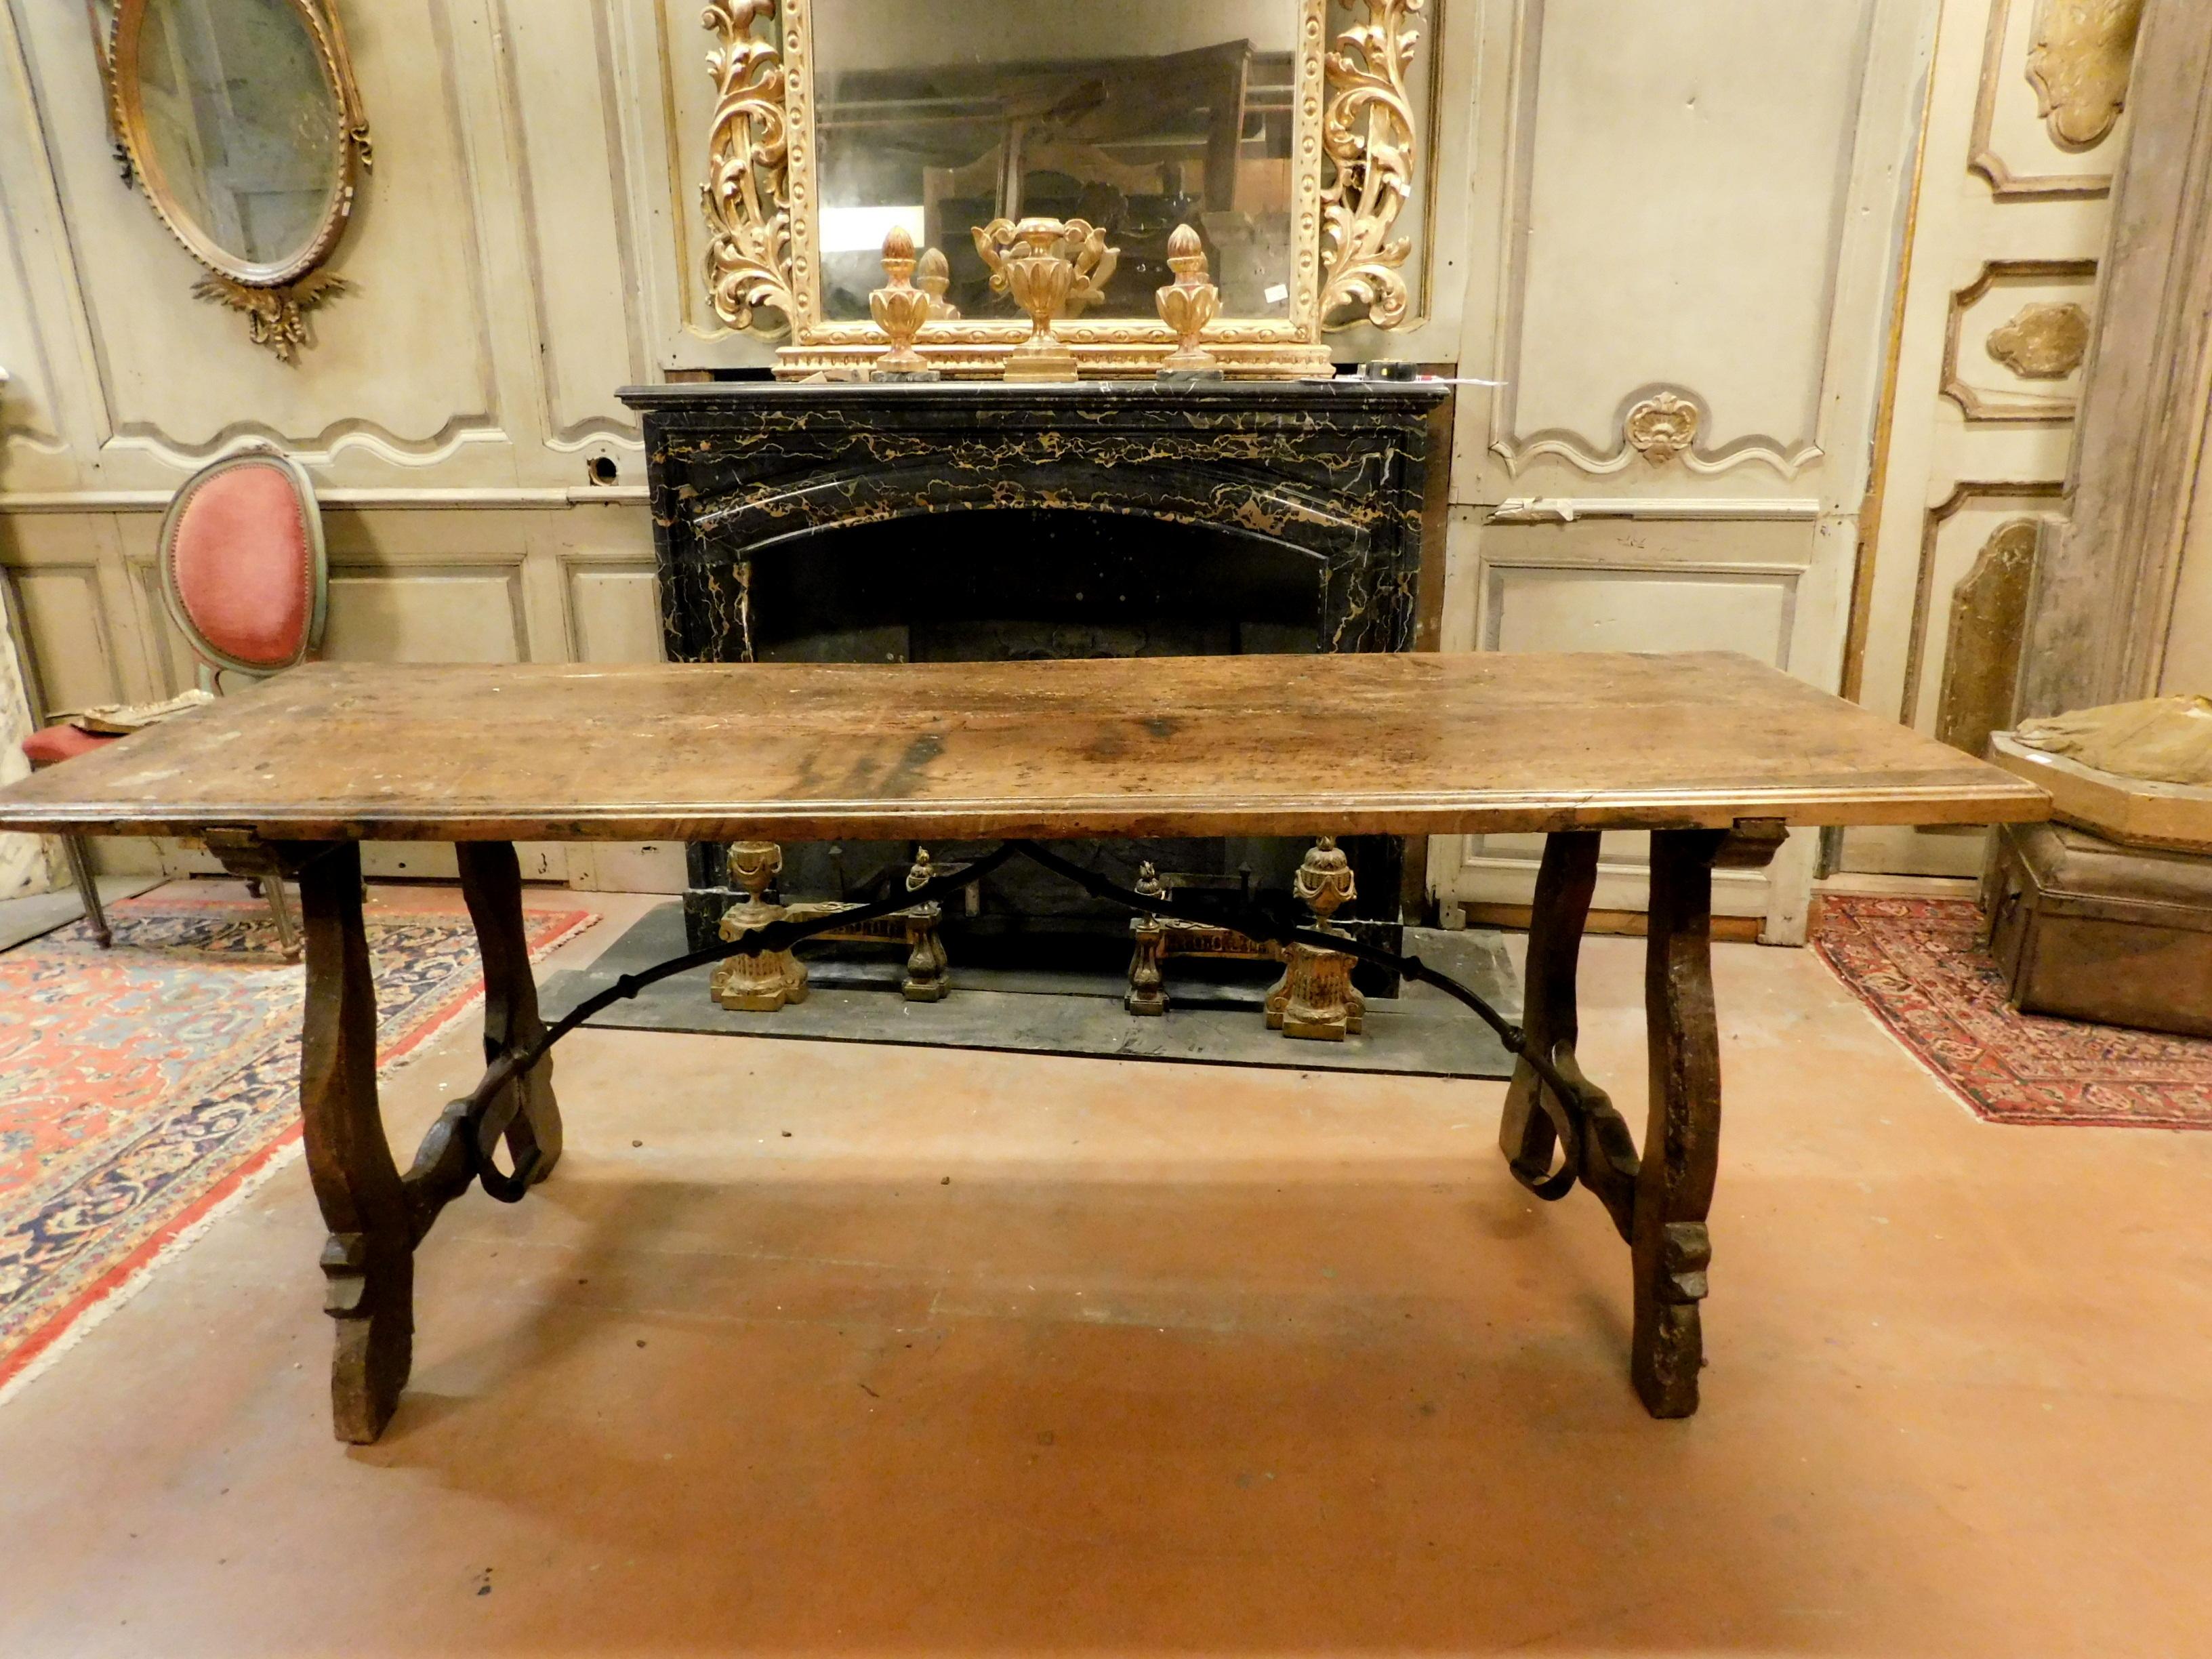 Hand-Carved Antique Refectory Table in Walnut, Original Irons, 18th Century Spain